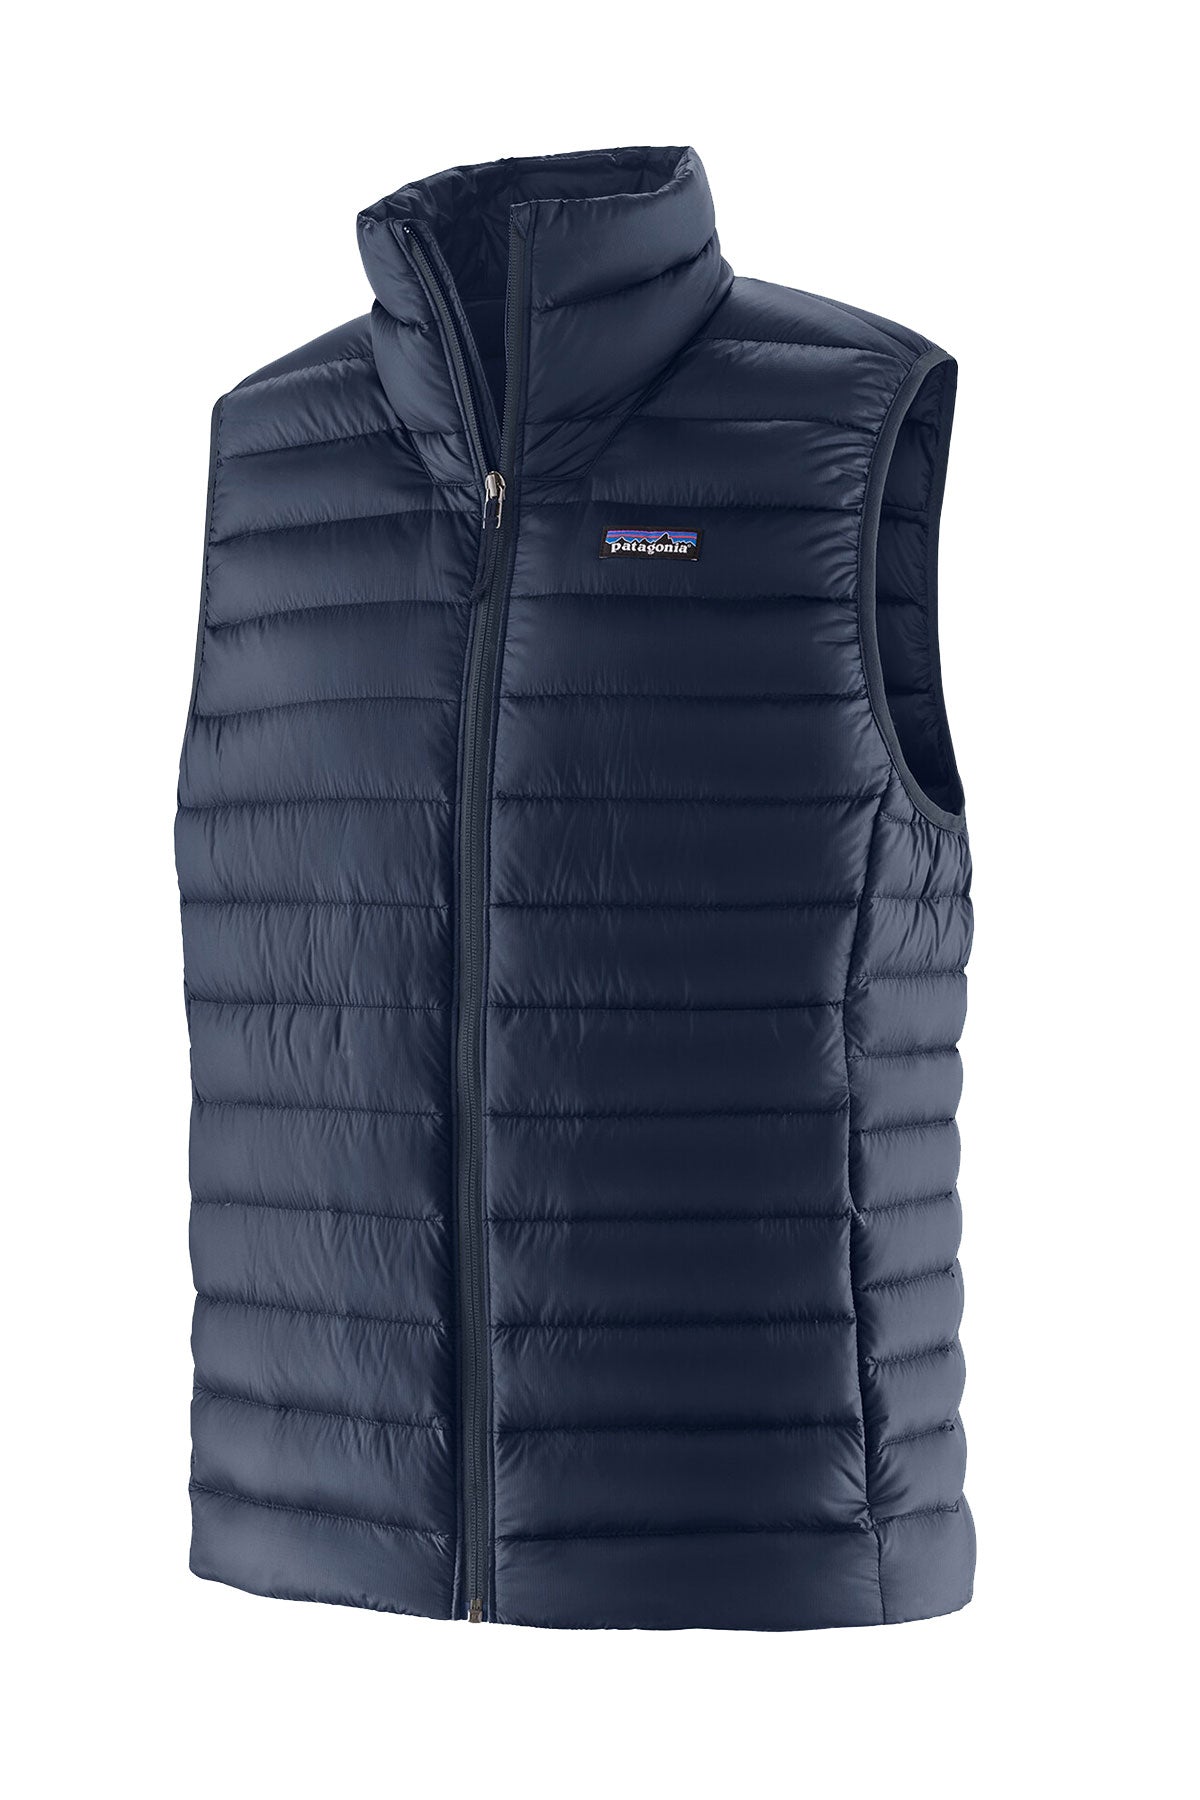 Patagonia Mens Down Sweater Customized Vests, New Navy